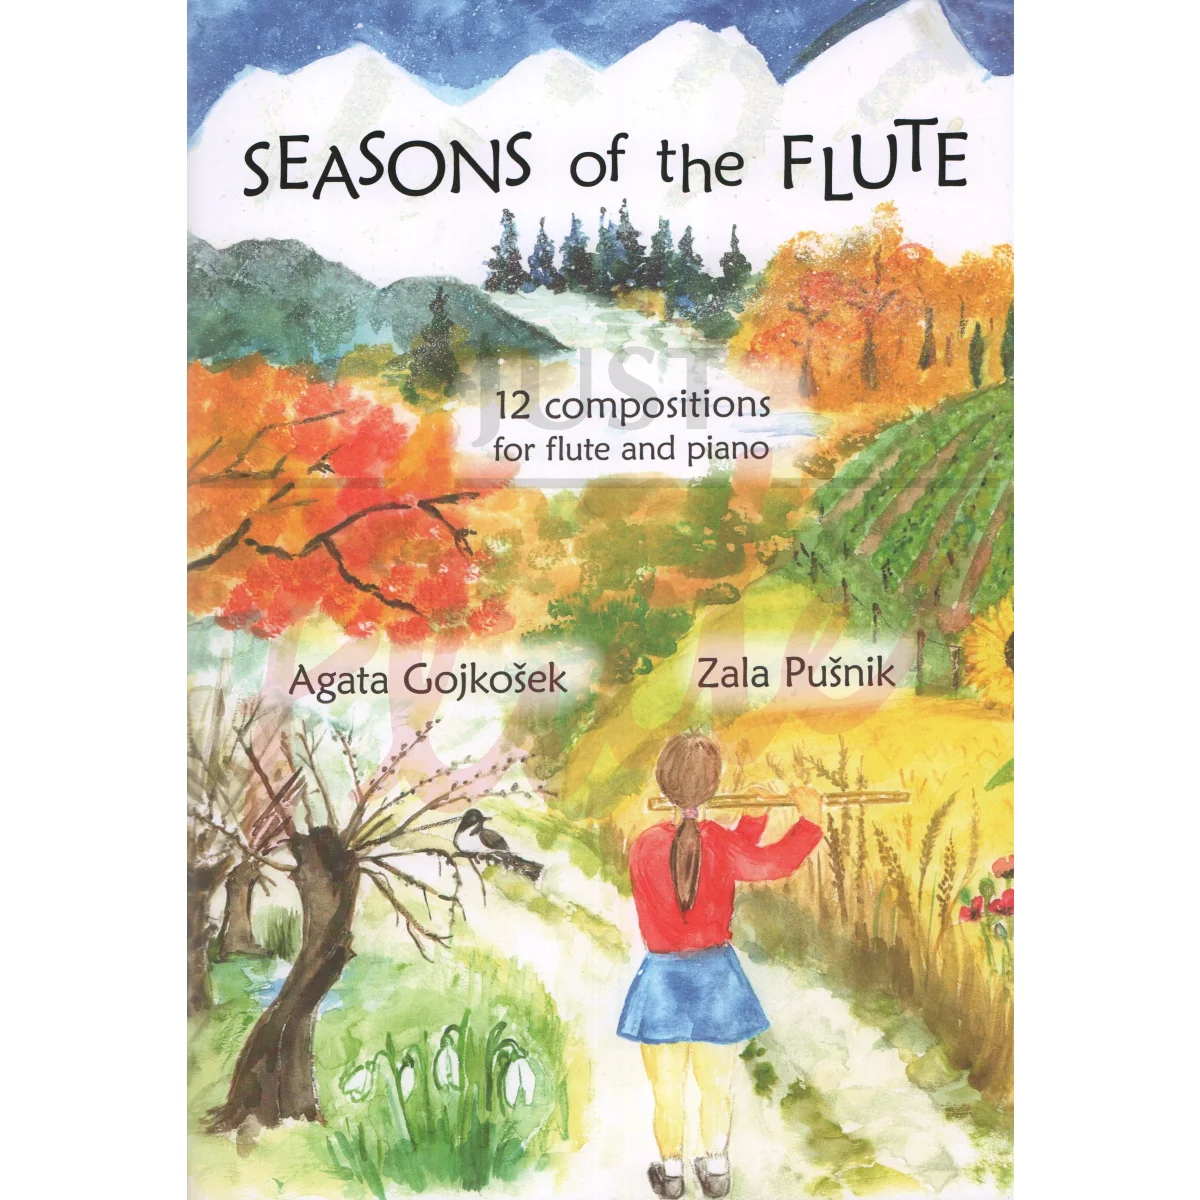 Seasons of the Flute: 12 Compositions for Flute and Piano